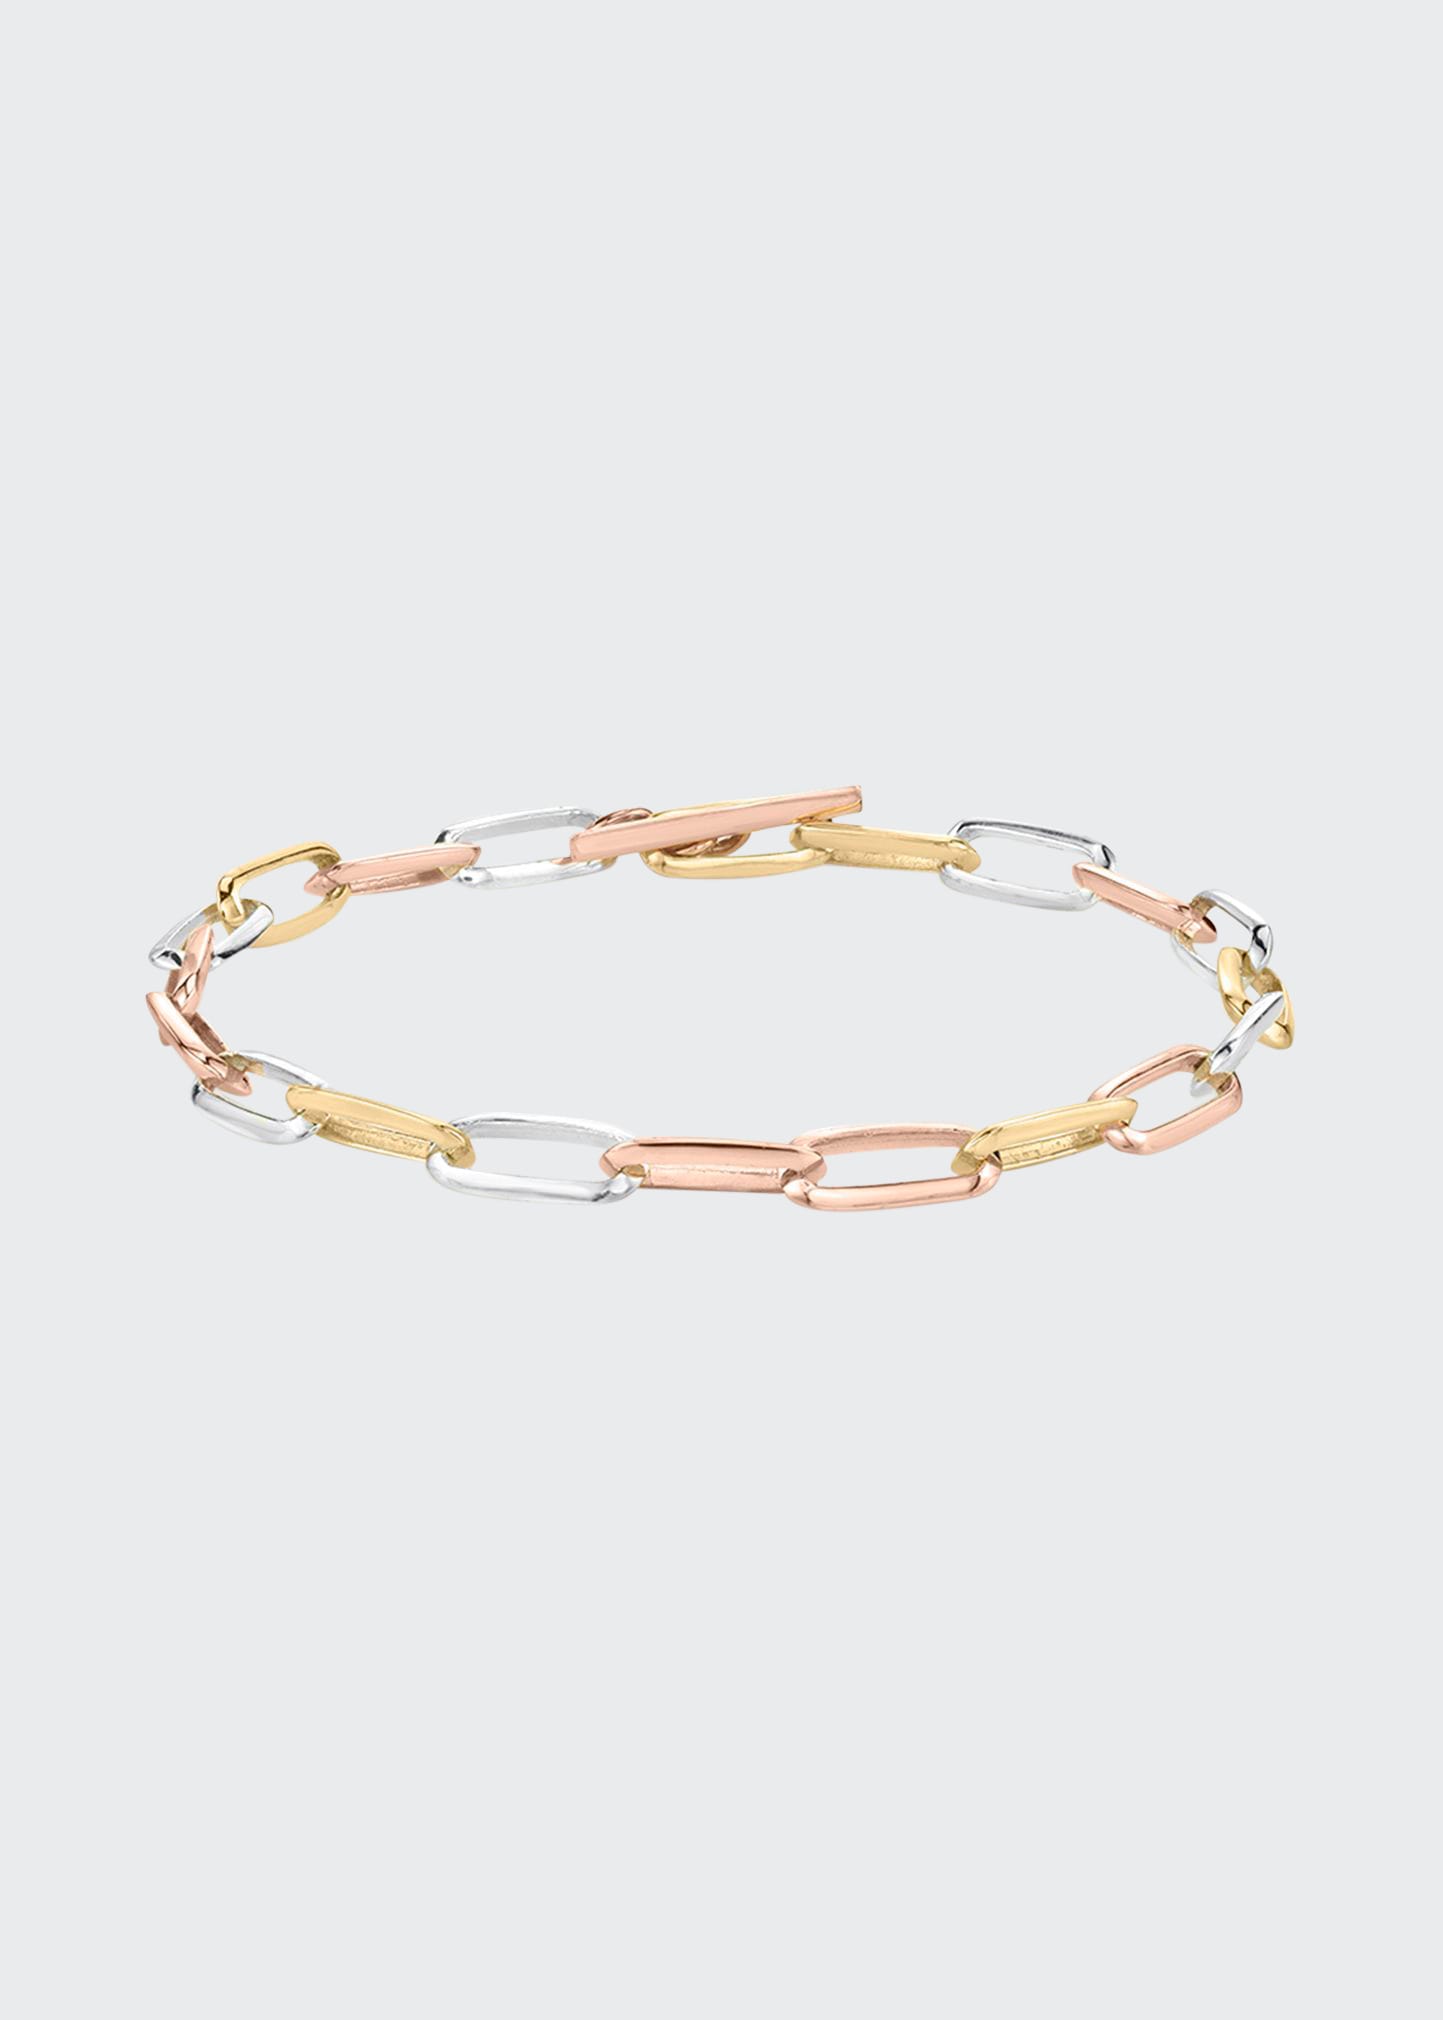 Lizzie Mandler Fine Jewelry Mixed Gold and Silver Knife Edge Bracelet